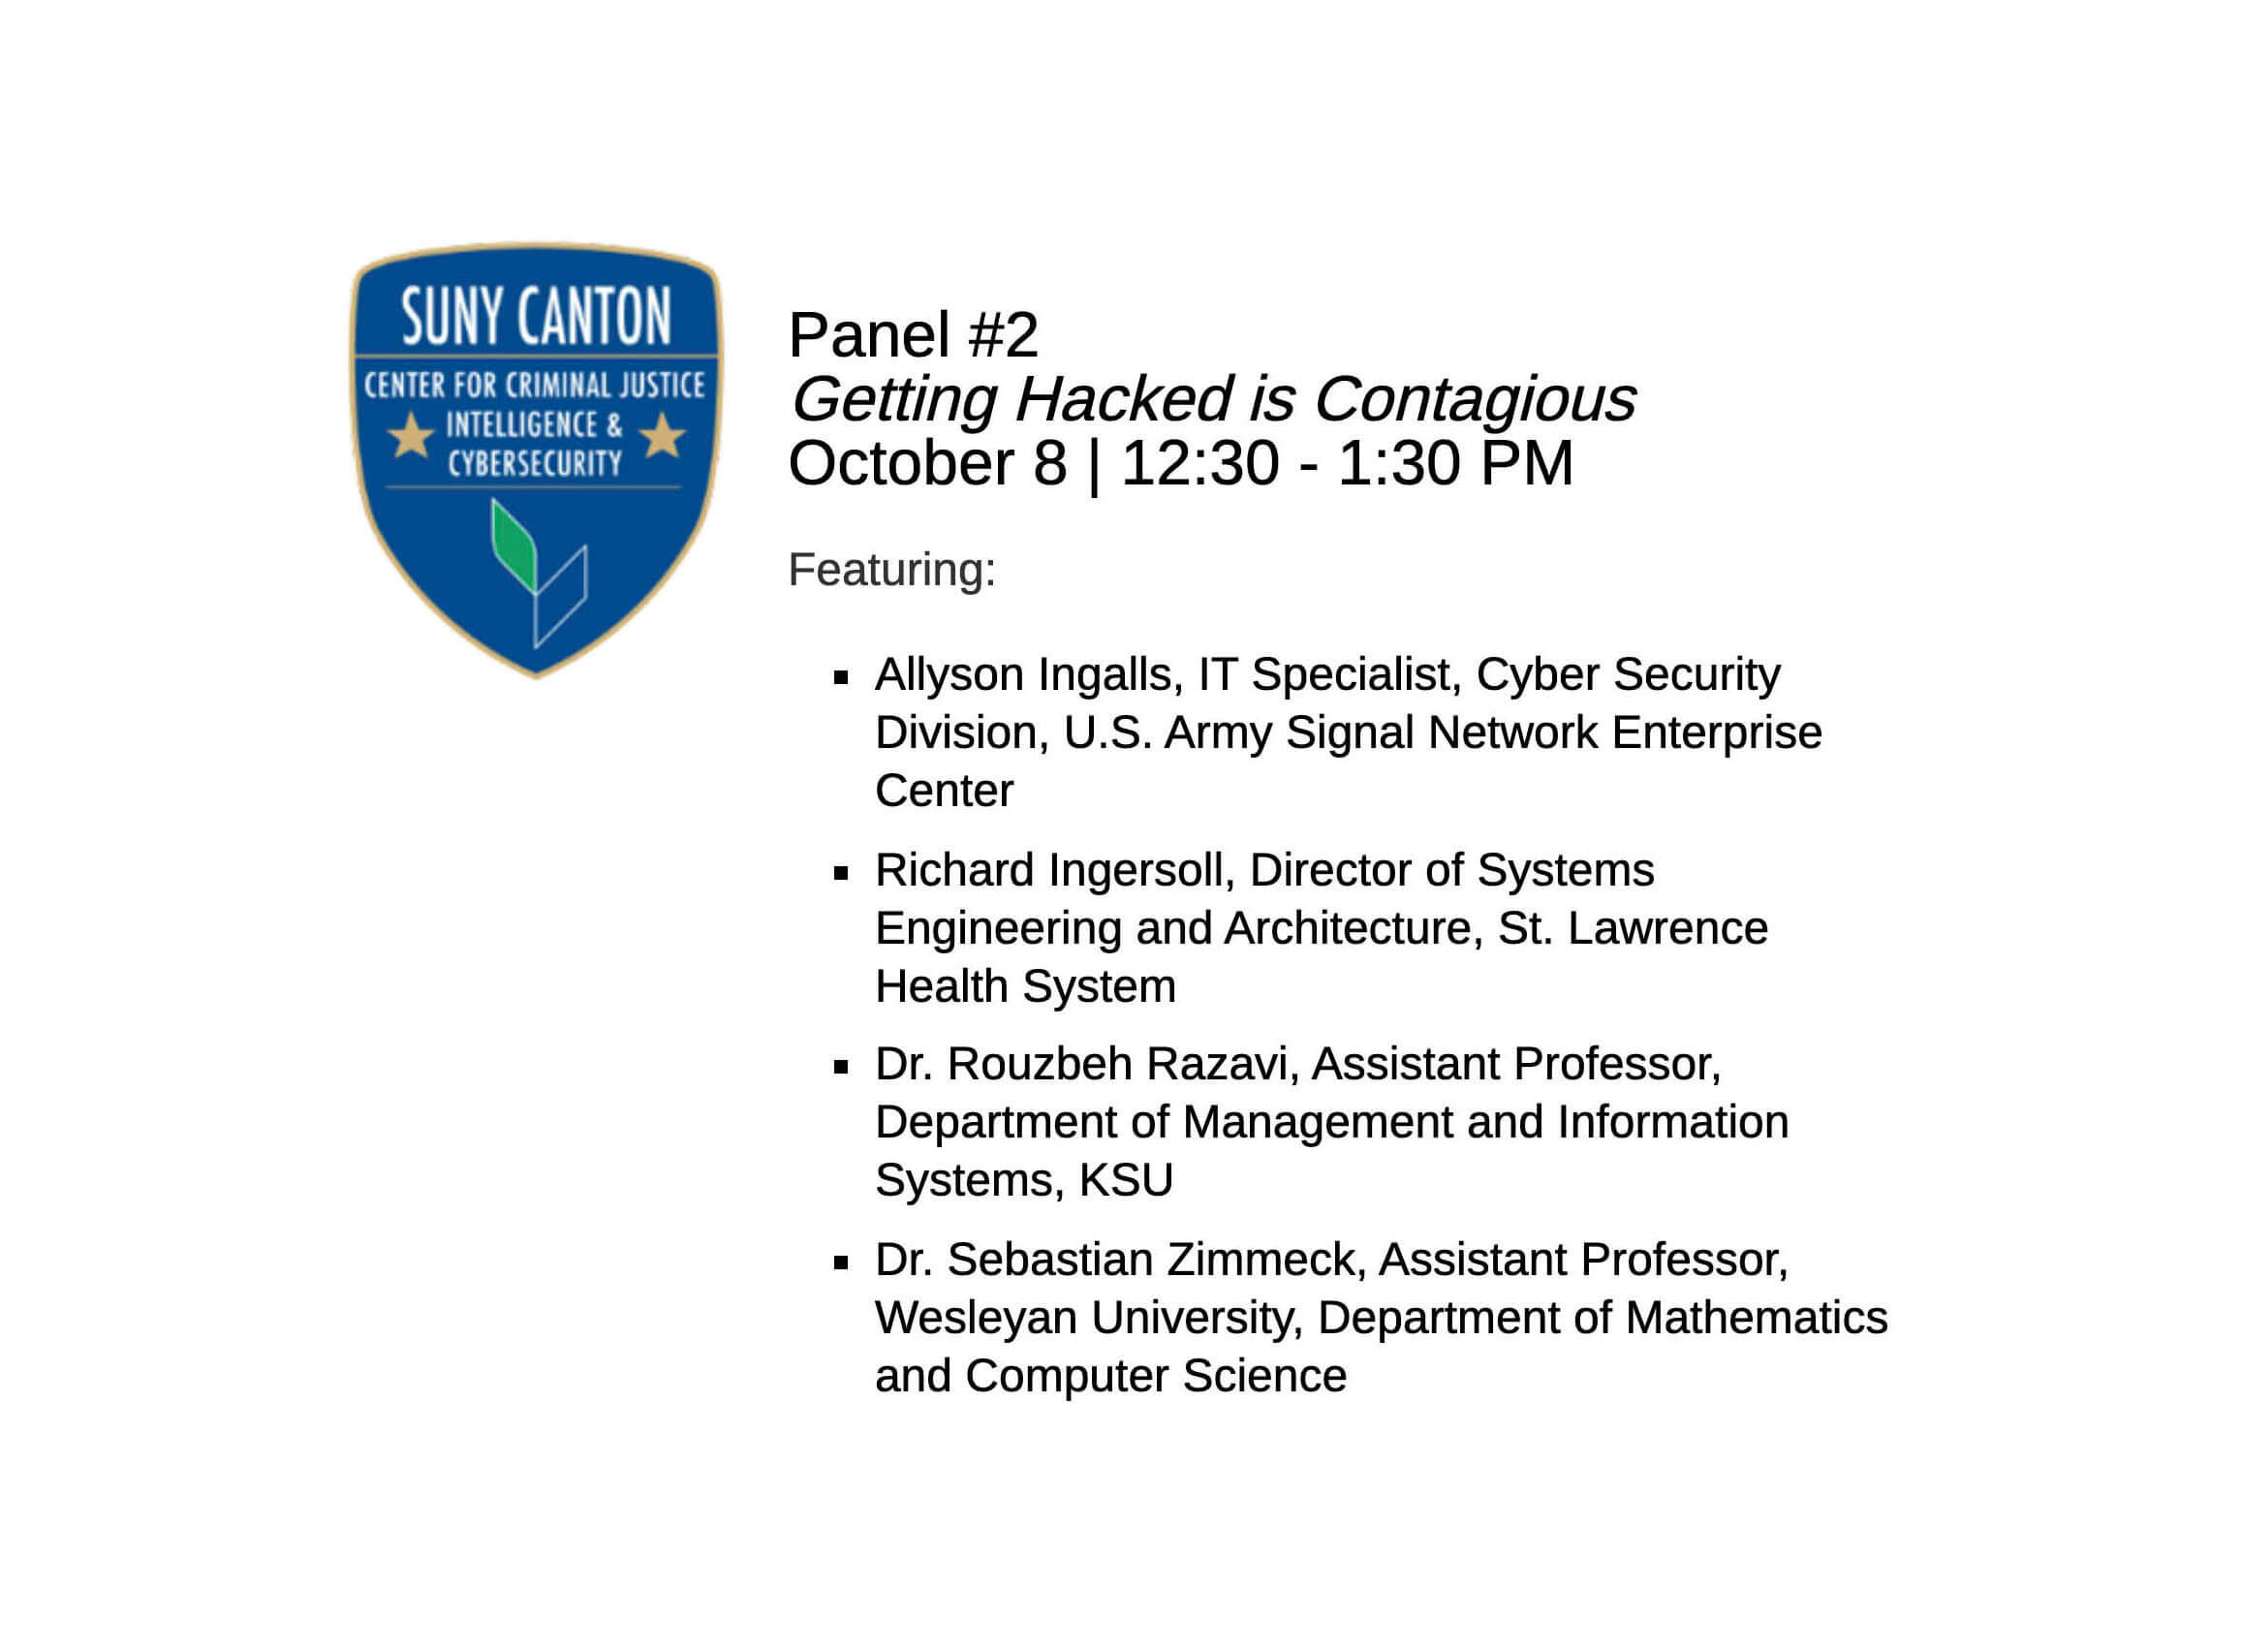 An announcement for a panel discussion on cybersecurity.